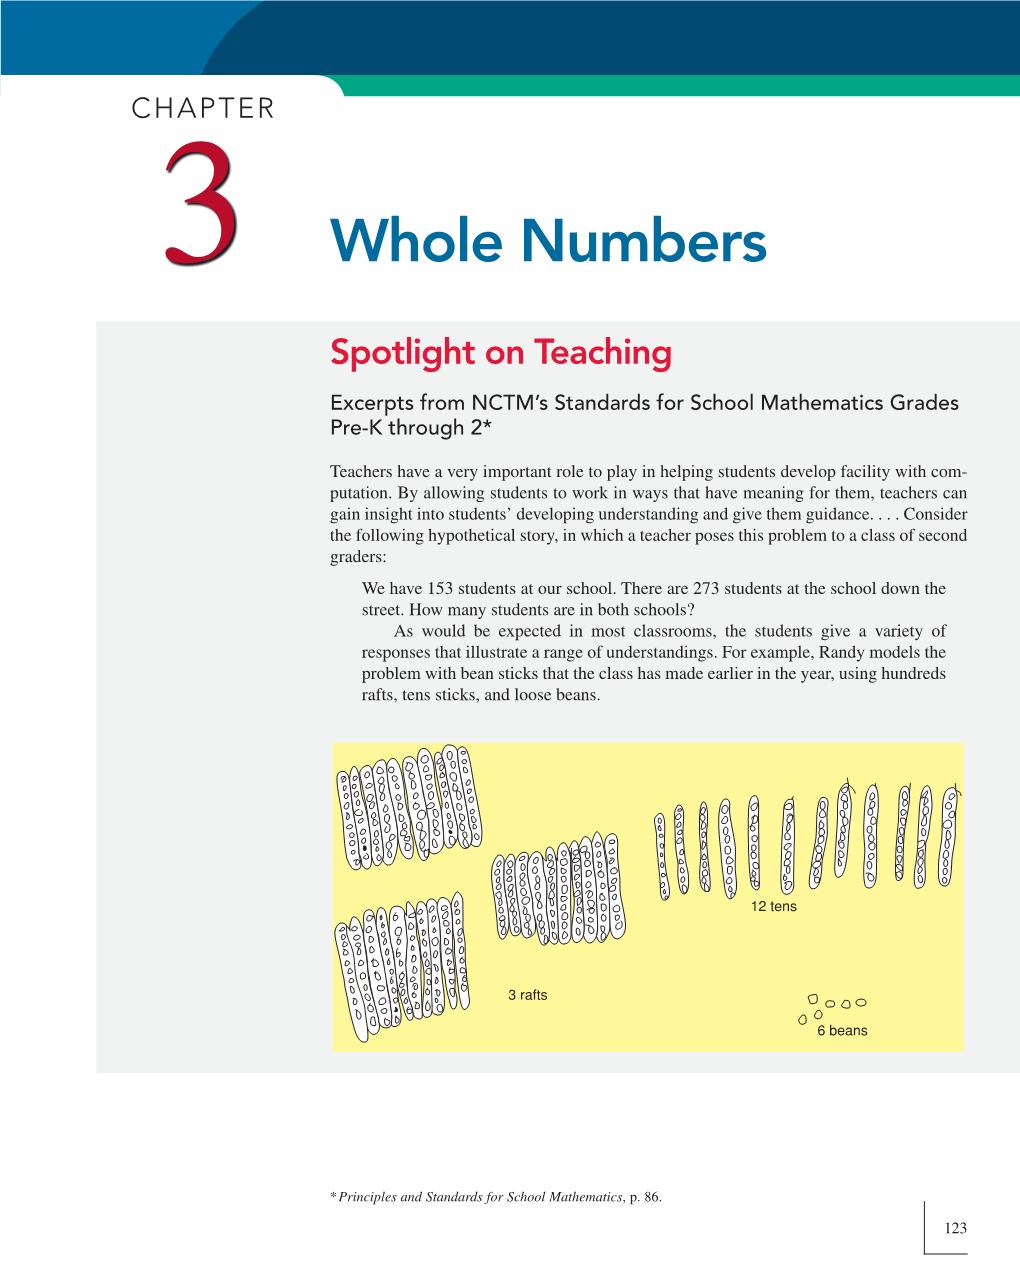 Whole Numbers Spotlight on Teaching Excerpts from NCTM’S Standards for School Mathematics Grades Pre-K Through 2*